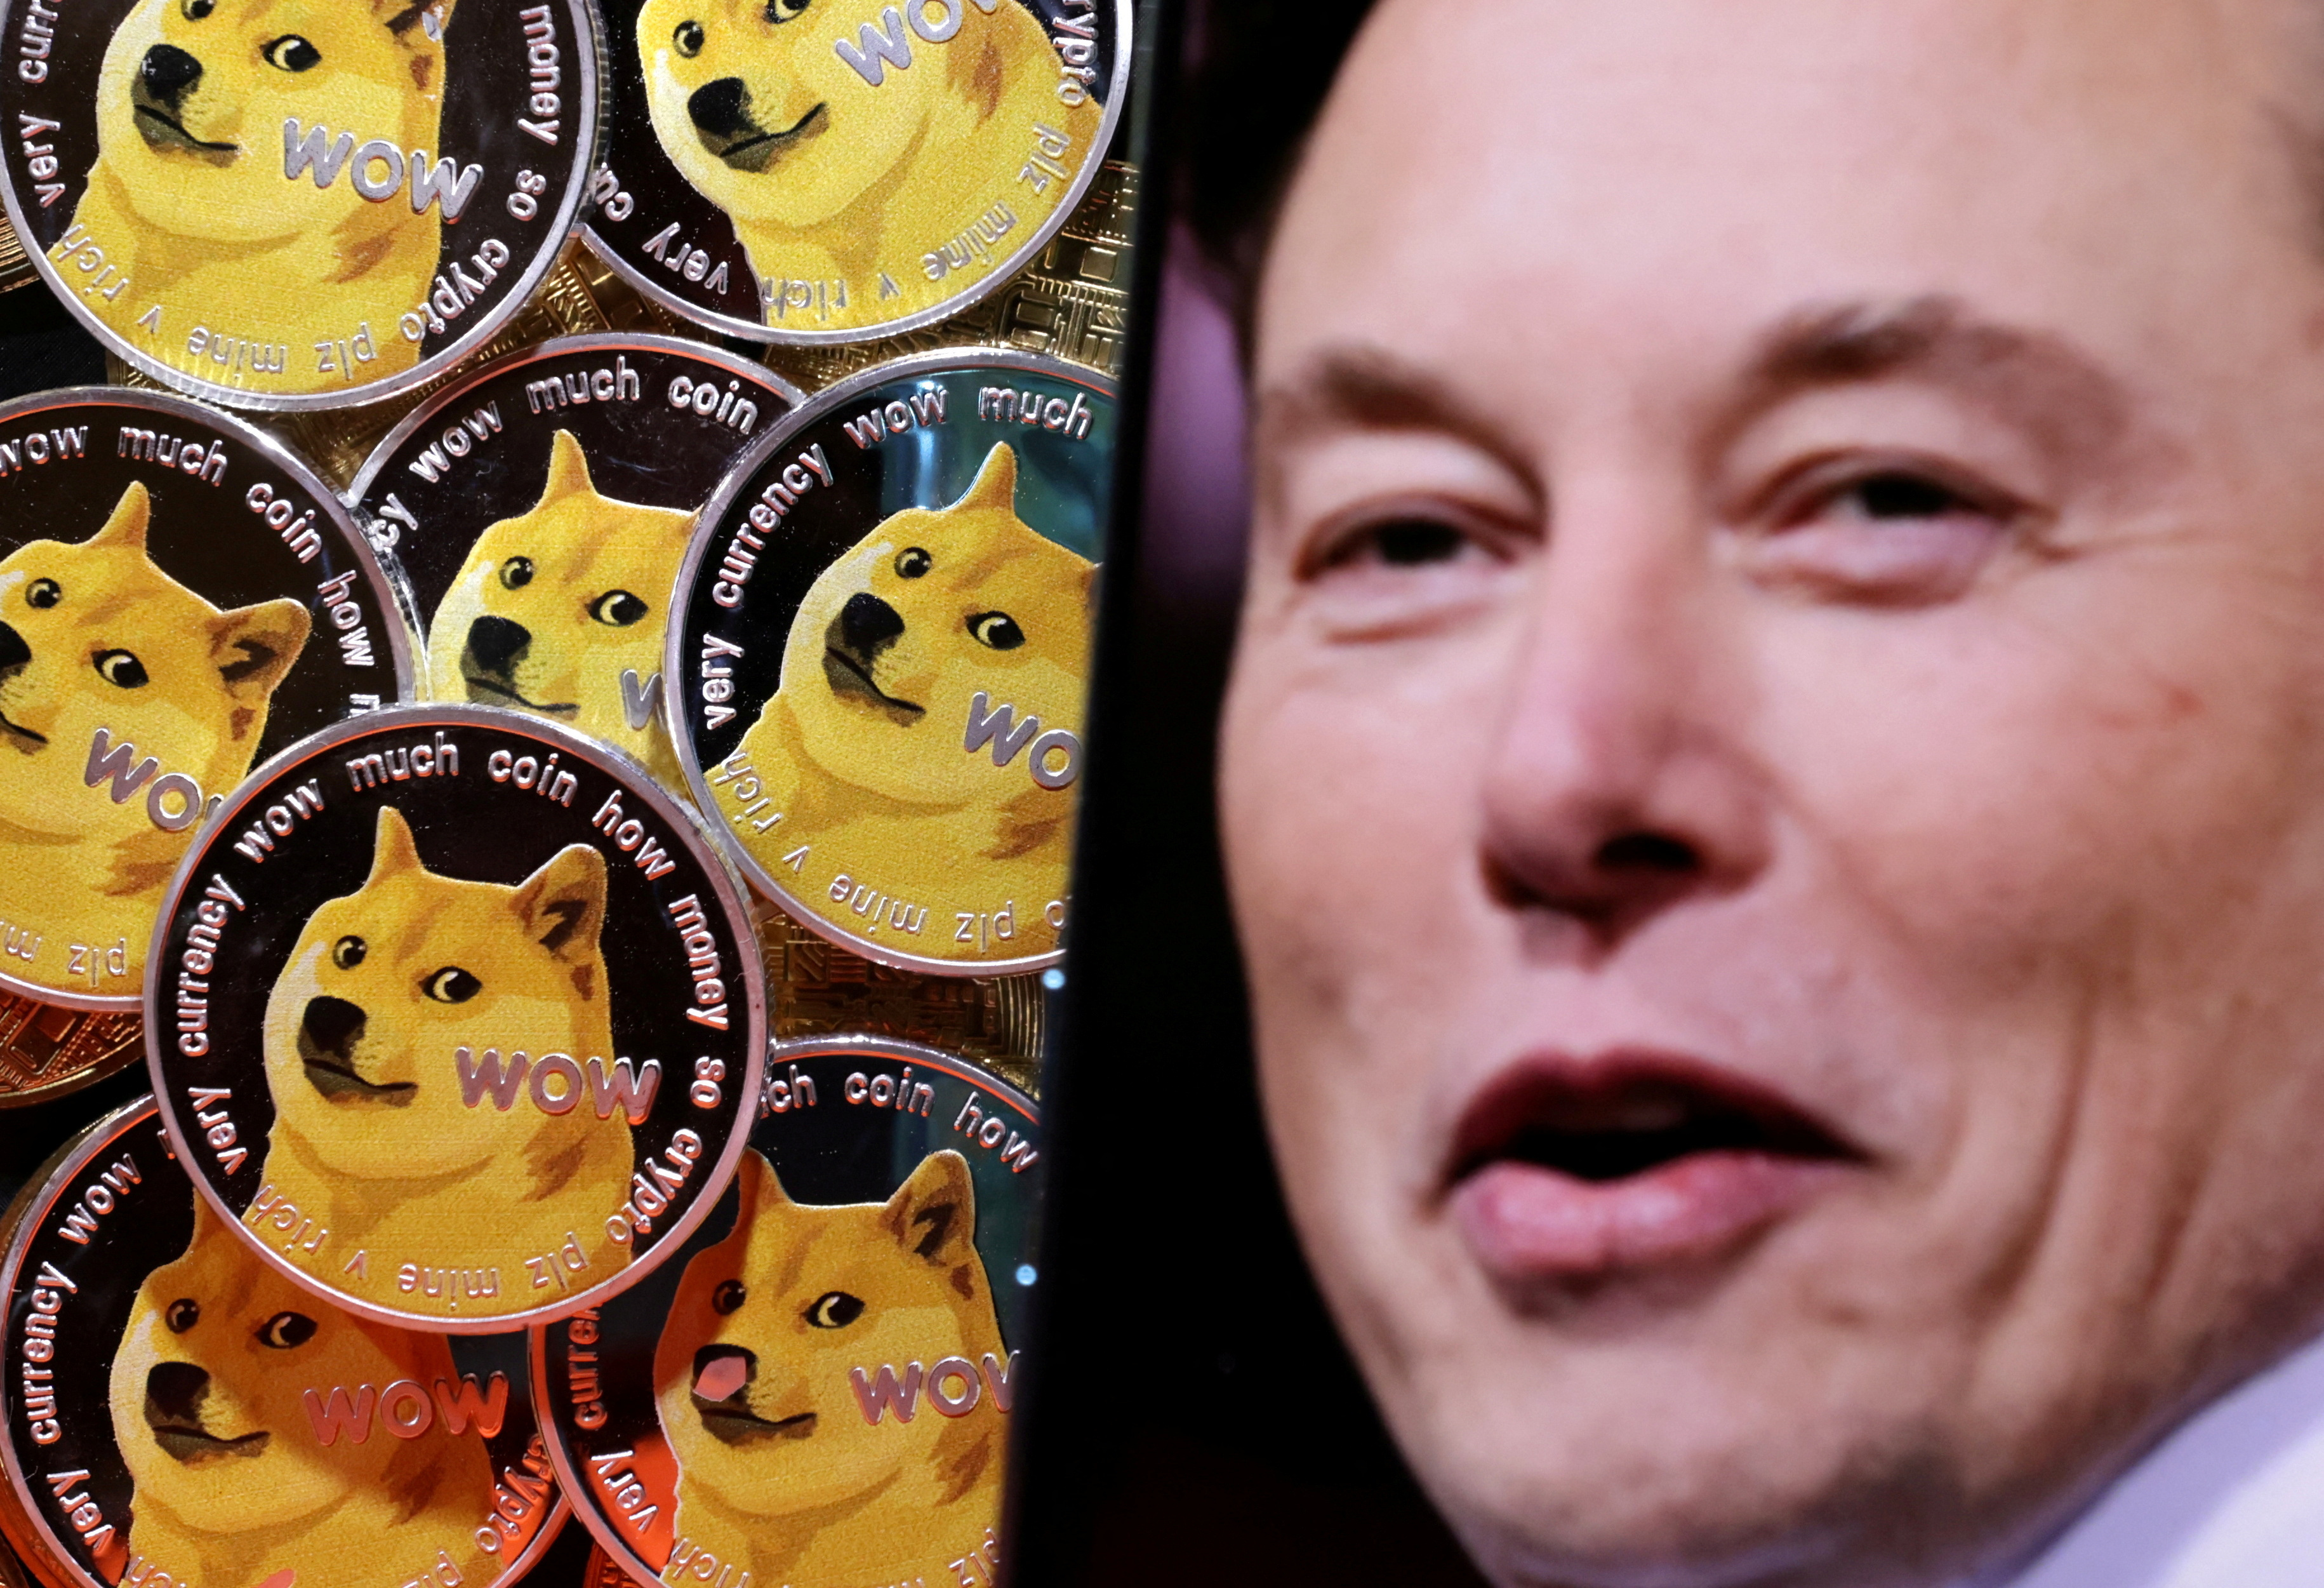 The illustration shows Elon Musk and representations of the Dogecoin cryptocurrency